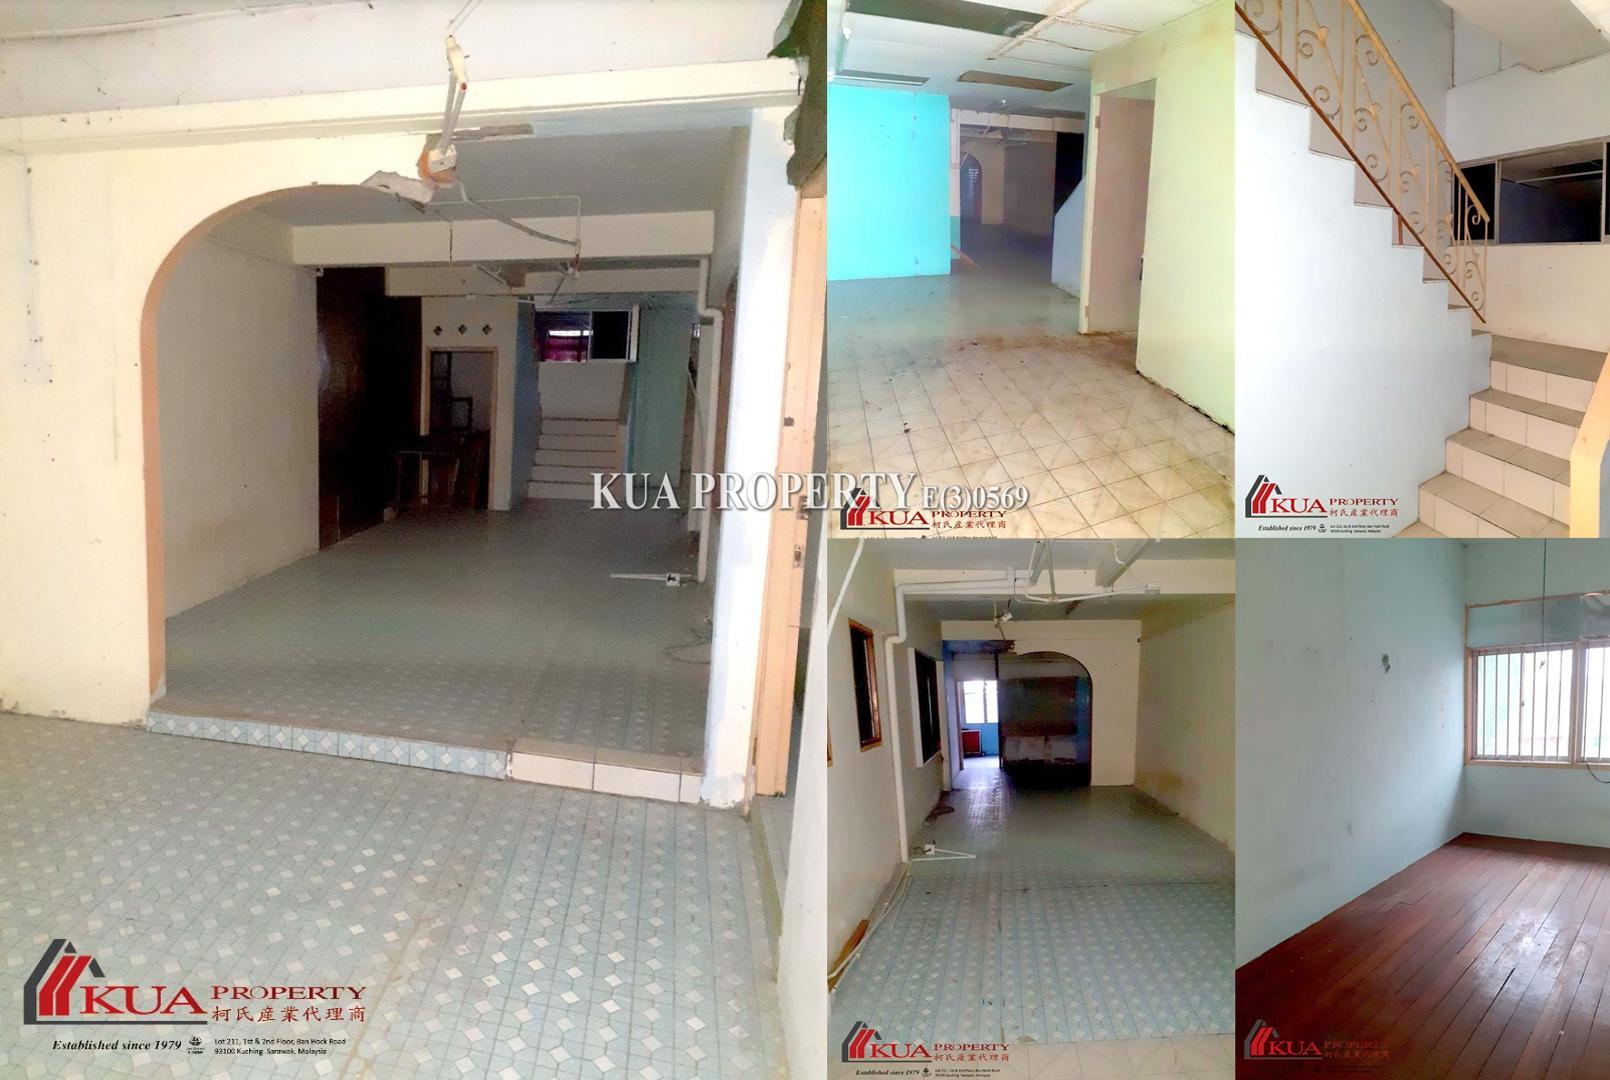 Double Storey Terrace Intermediate House For Sale! Located at Deshon Road, Kuching